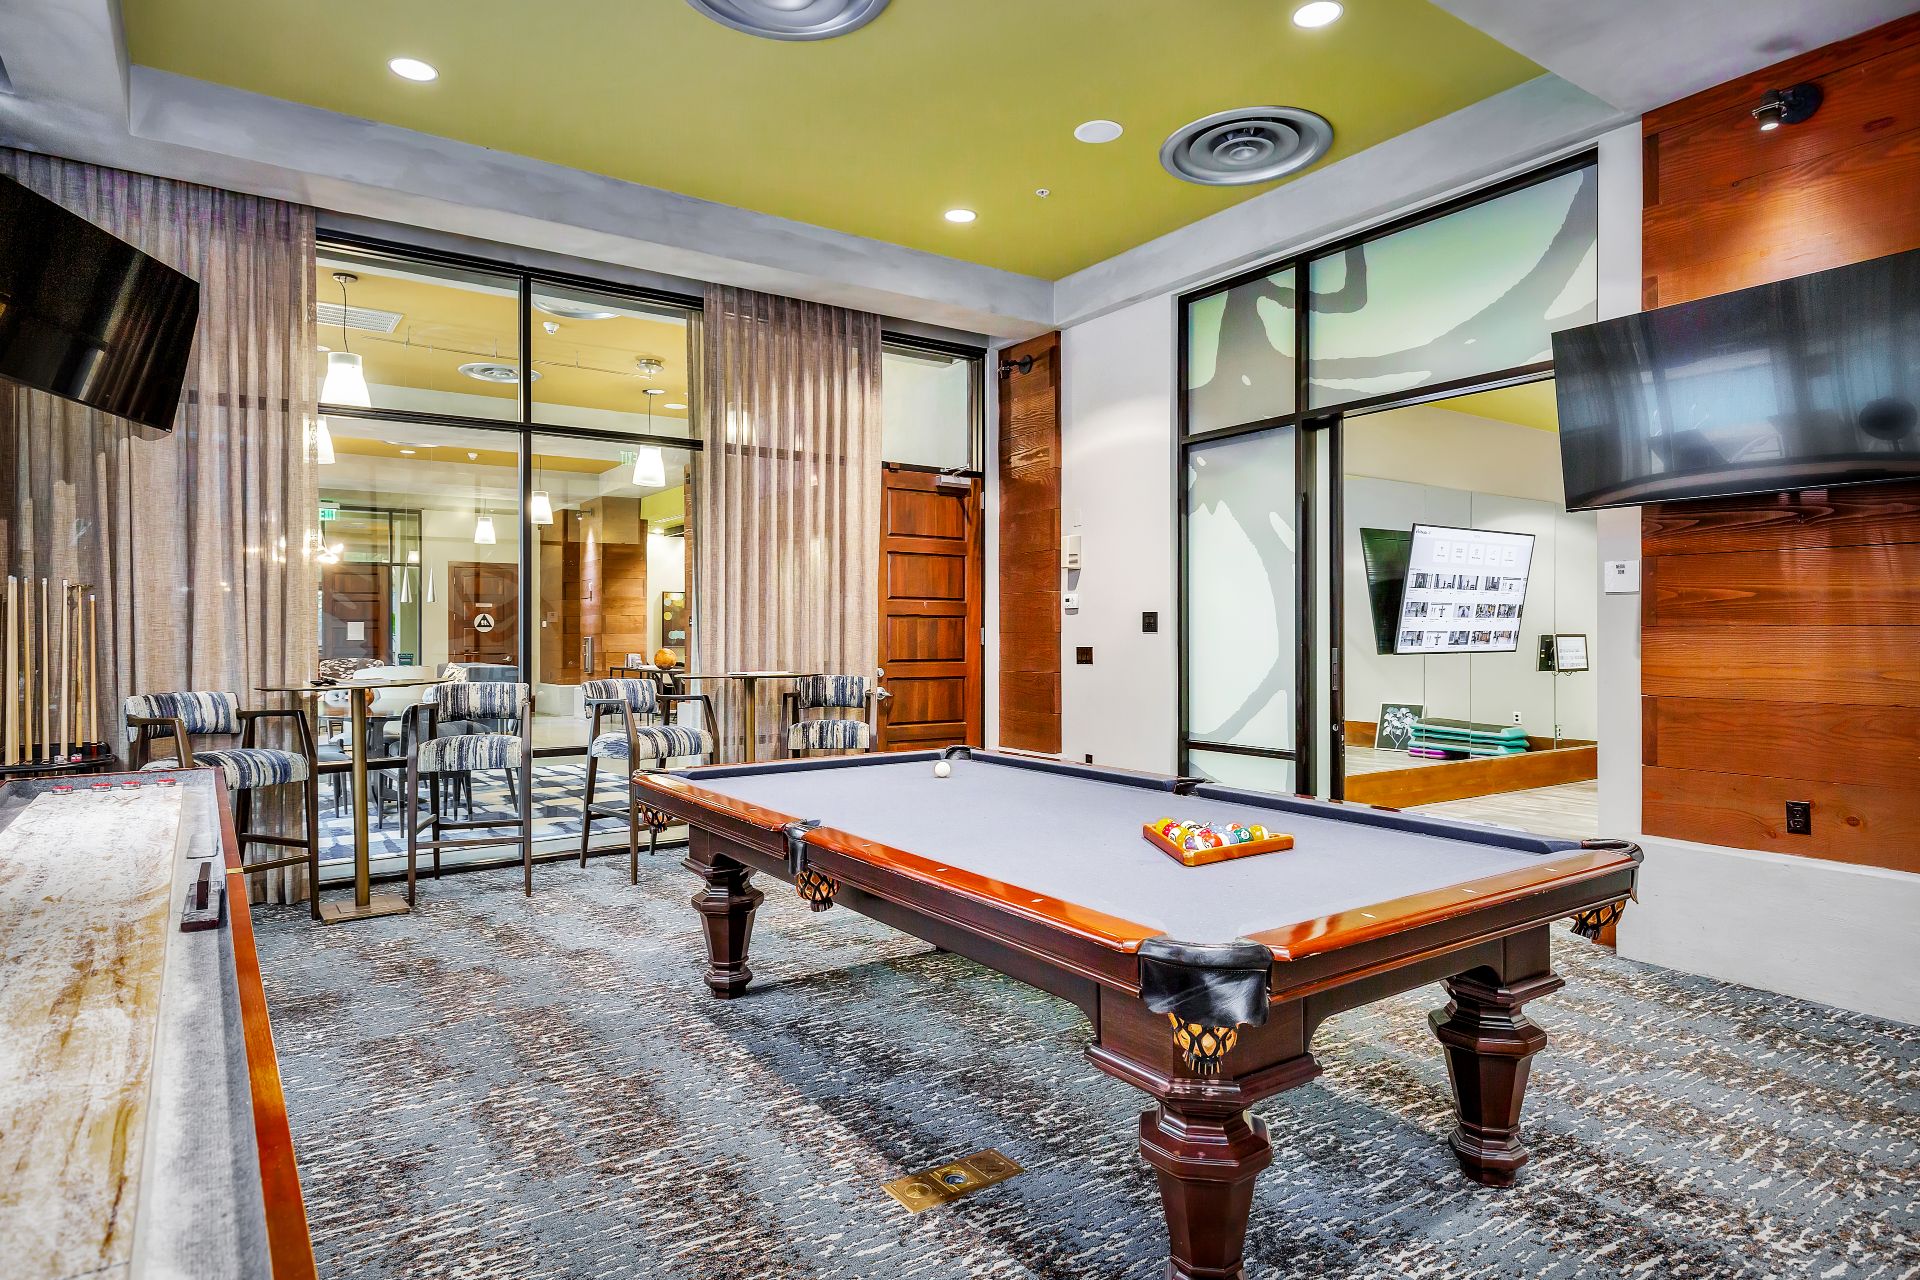 Club pool room - thumbnail of larger image